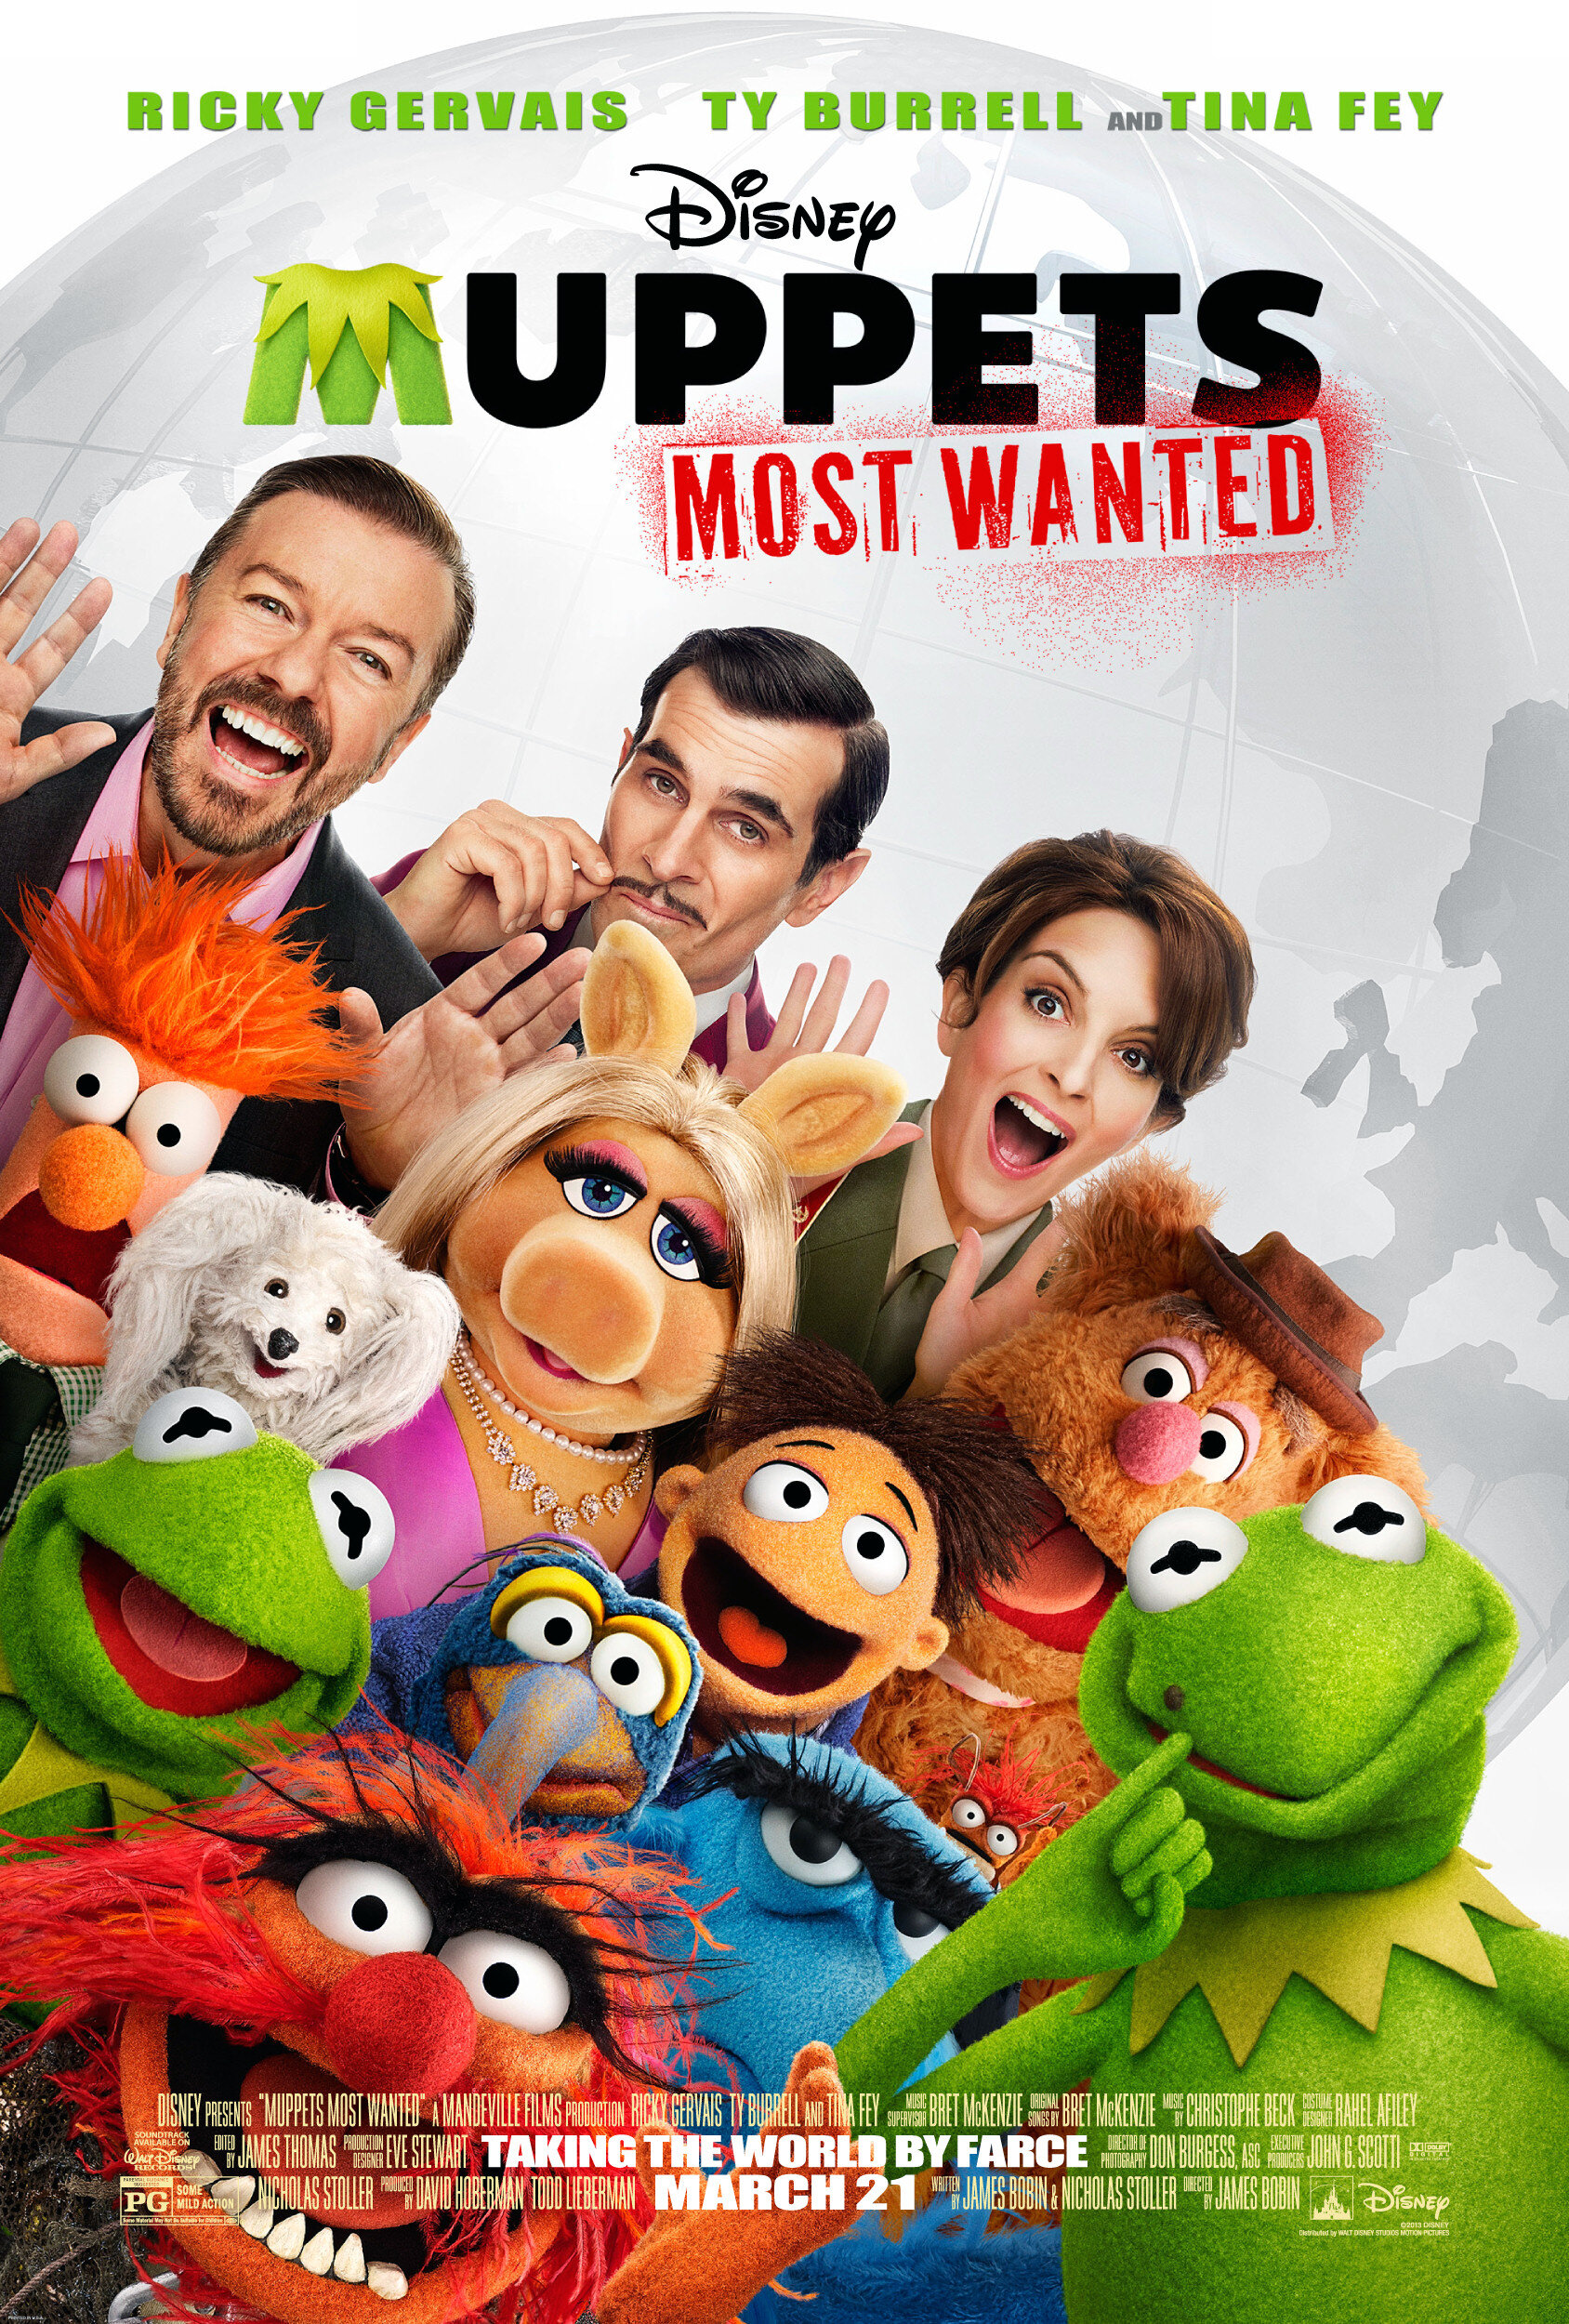 Muppets-Most-Wanted-Poster.jpeg